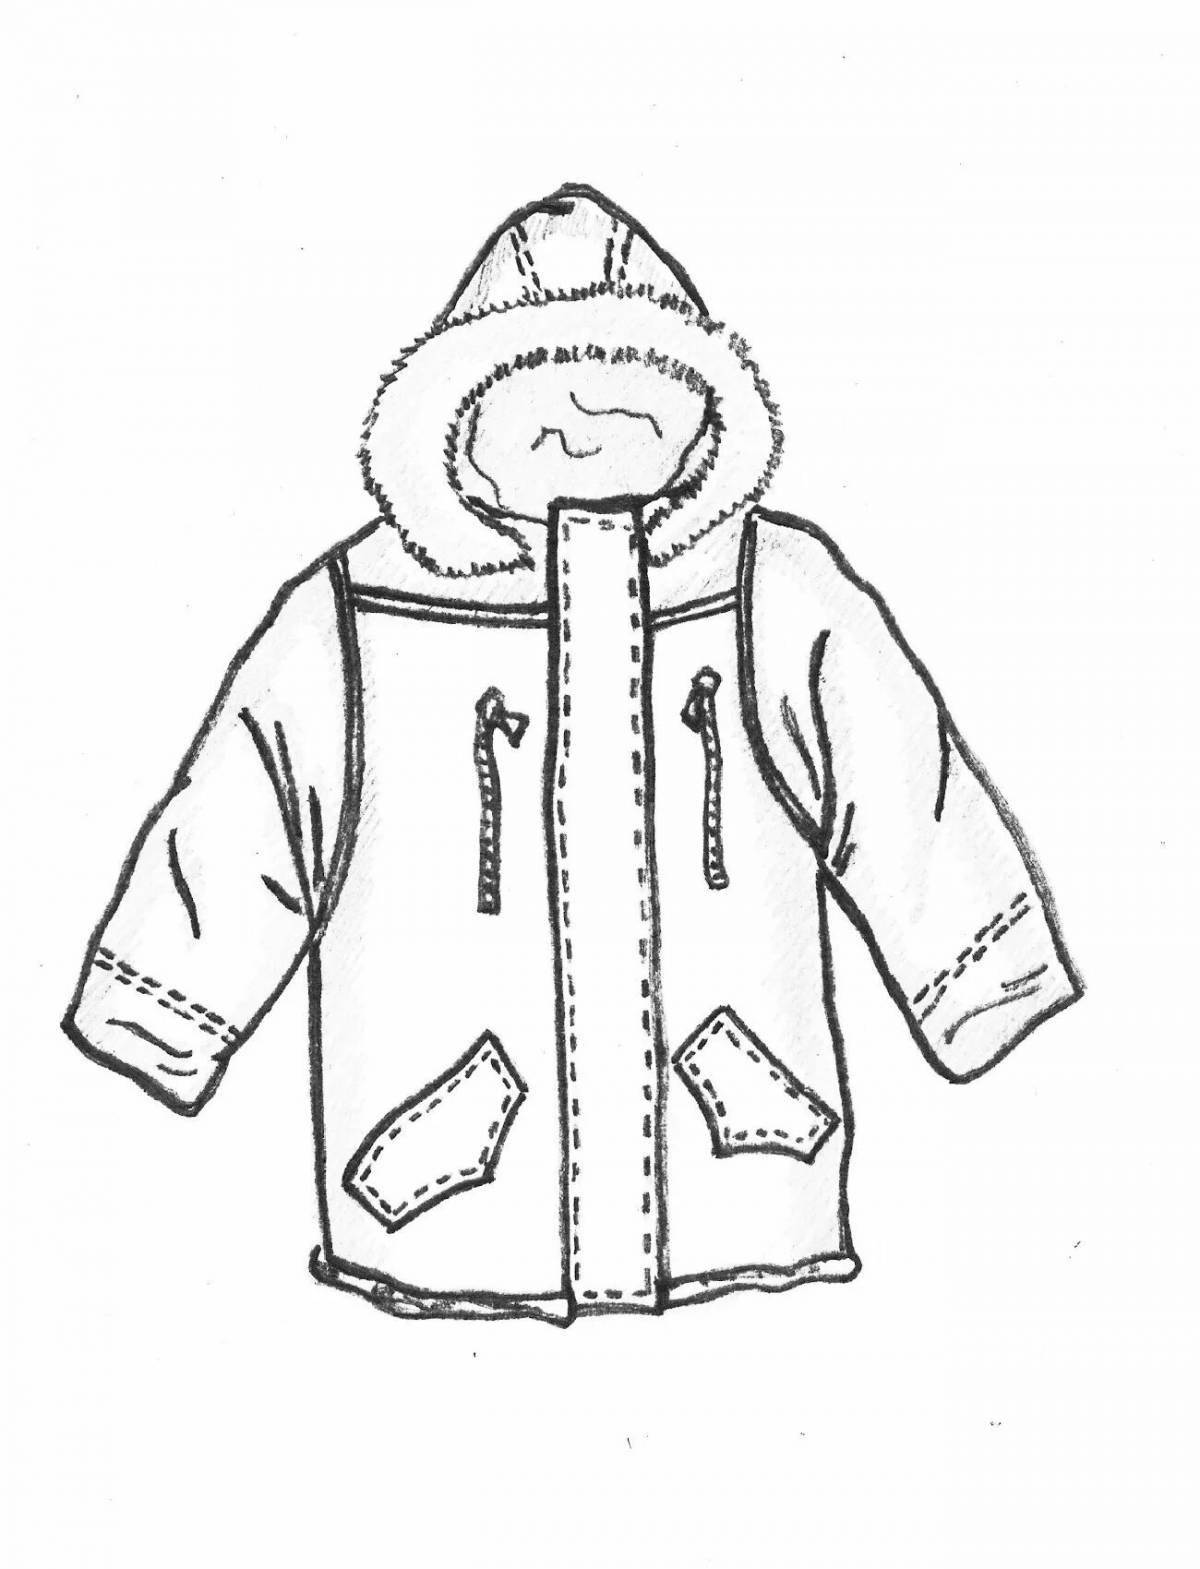 Coloring book with a trendy jacket for children 3-4 years old